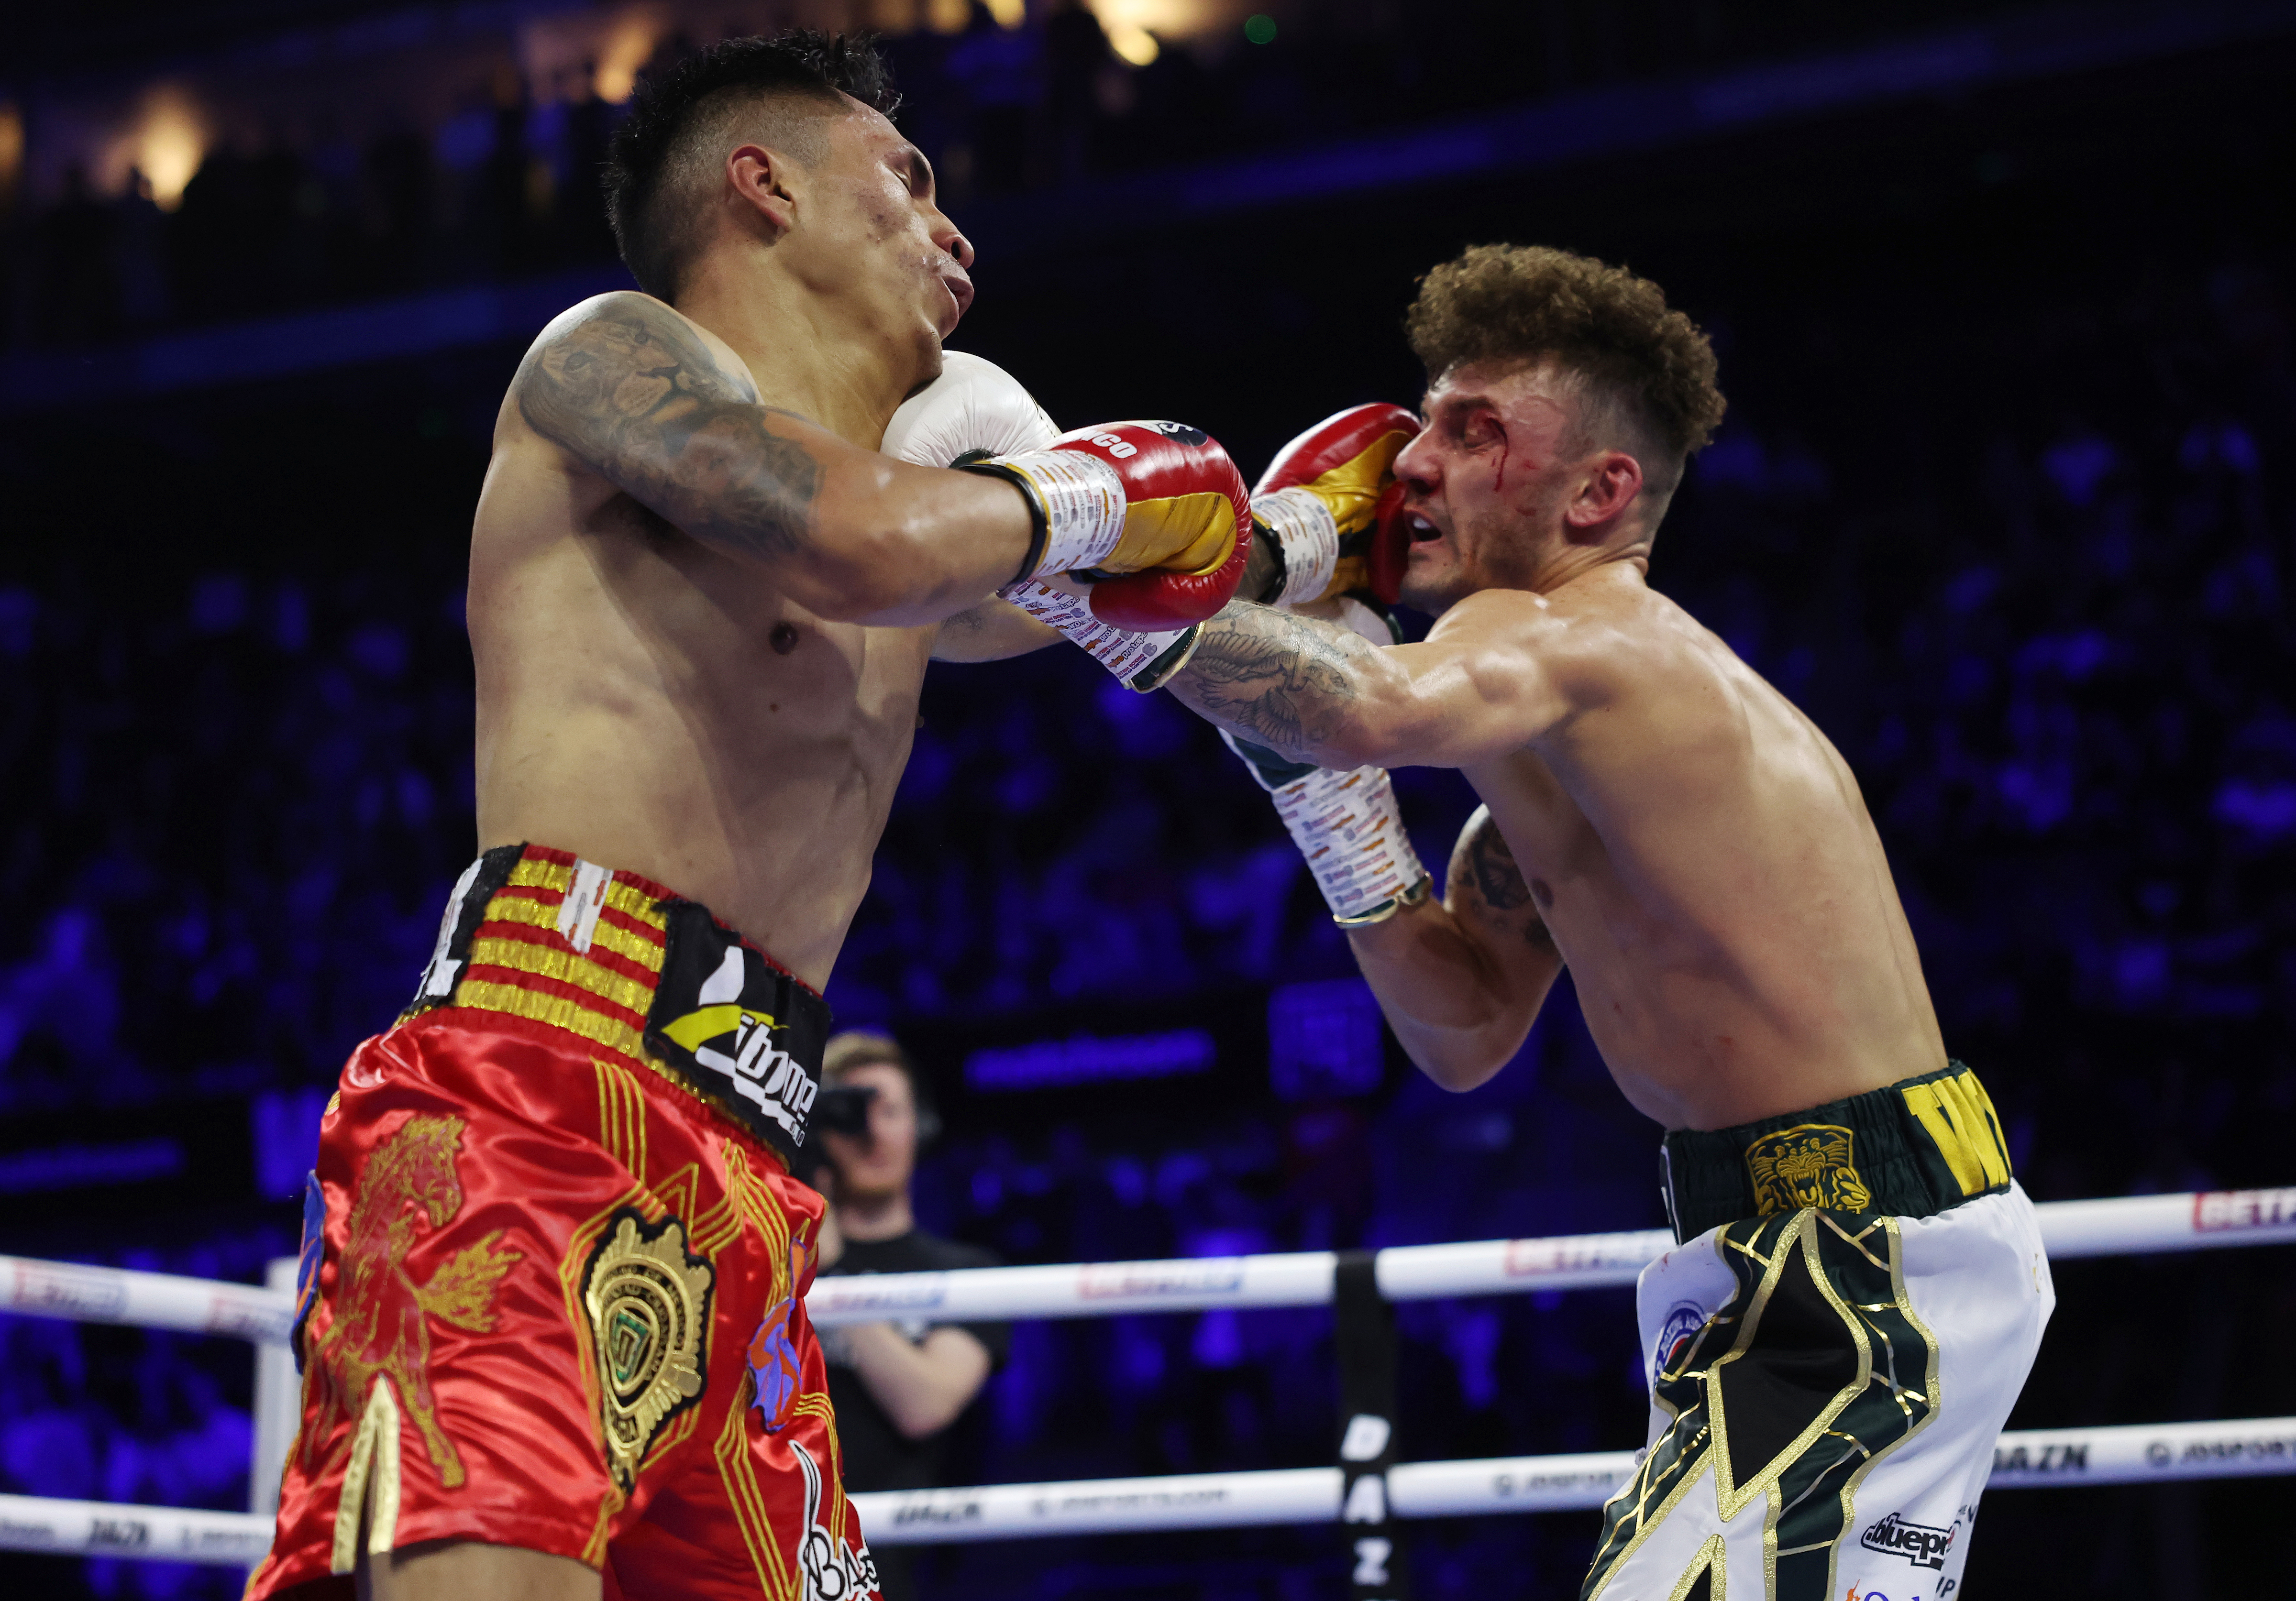 Mauricio Lara caught Leigh Wood with a clean shot in round seven to take the WBA featherweight title